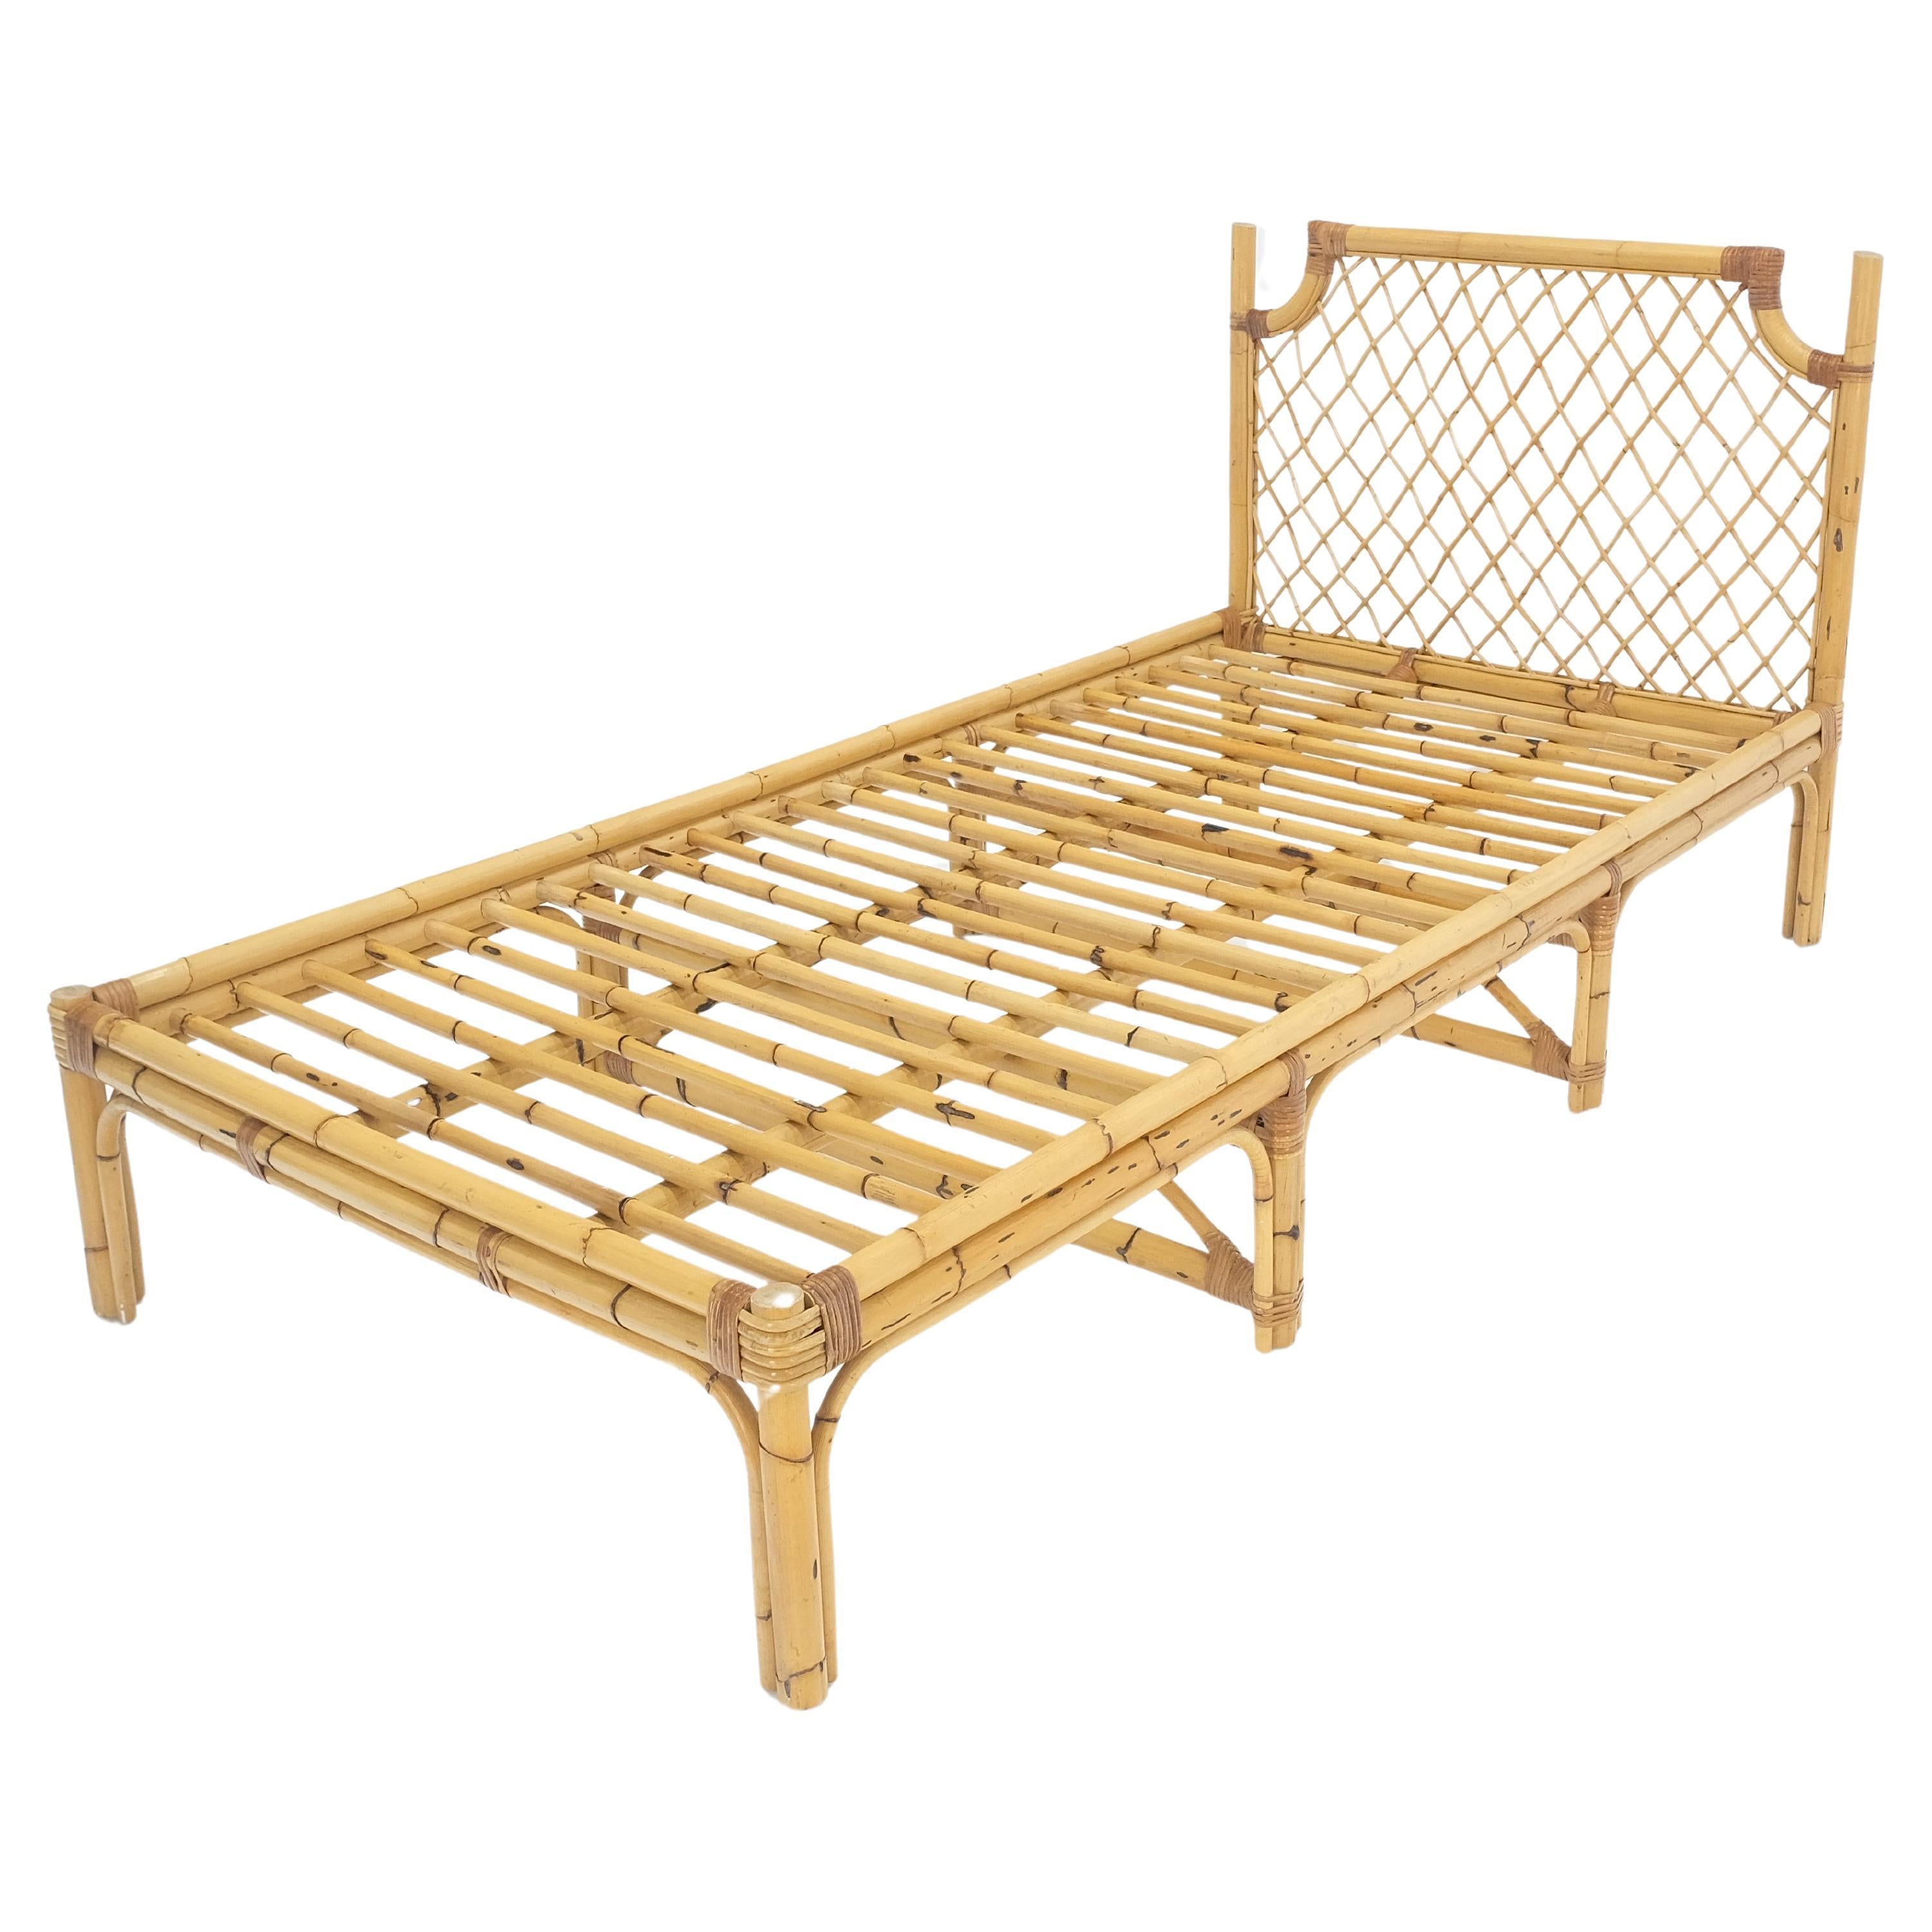 Vintage 1970s Large Bamboo Chaise Lounge Daybed Frame MINT! im Angebot